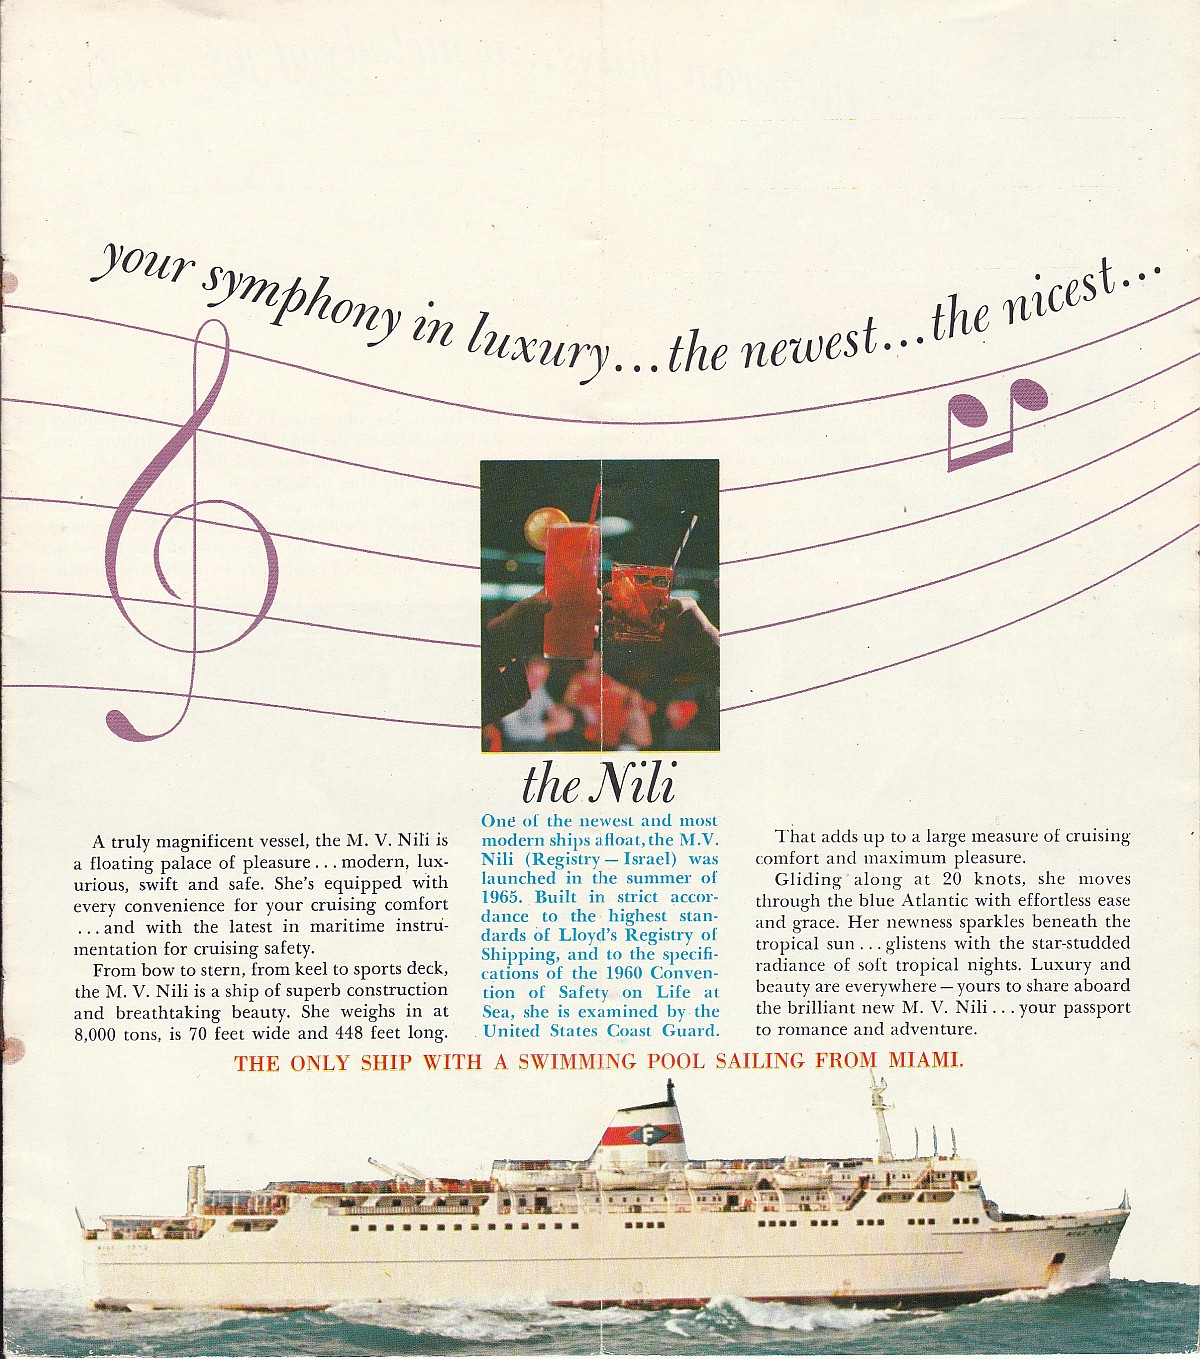 mv Nili Introduction and side view of ship: Your symphony in luxury - the newest, the nicest, the Nili